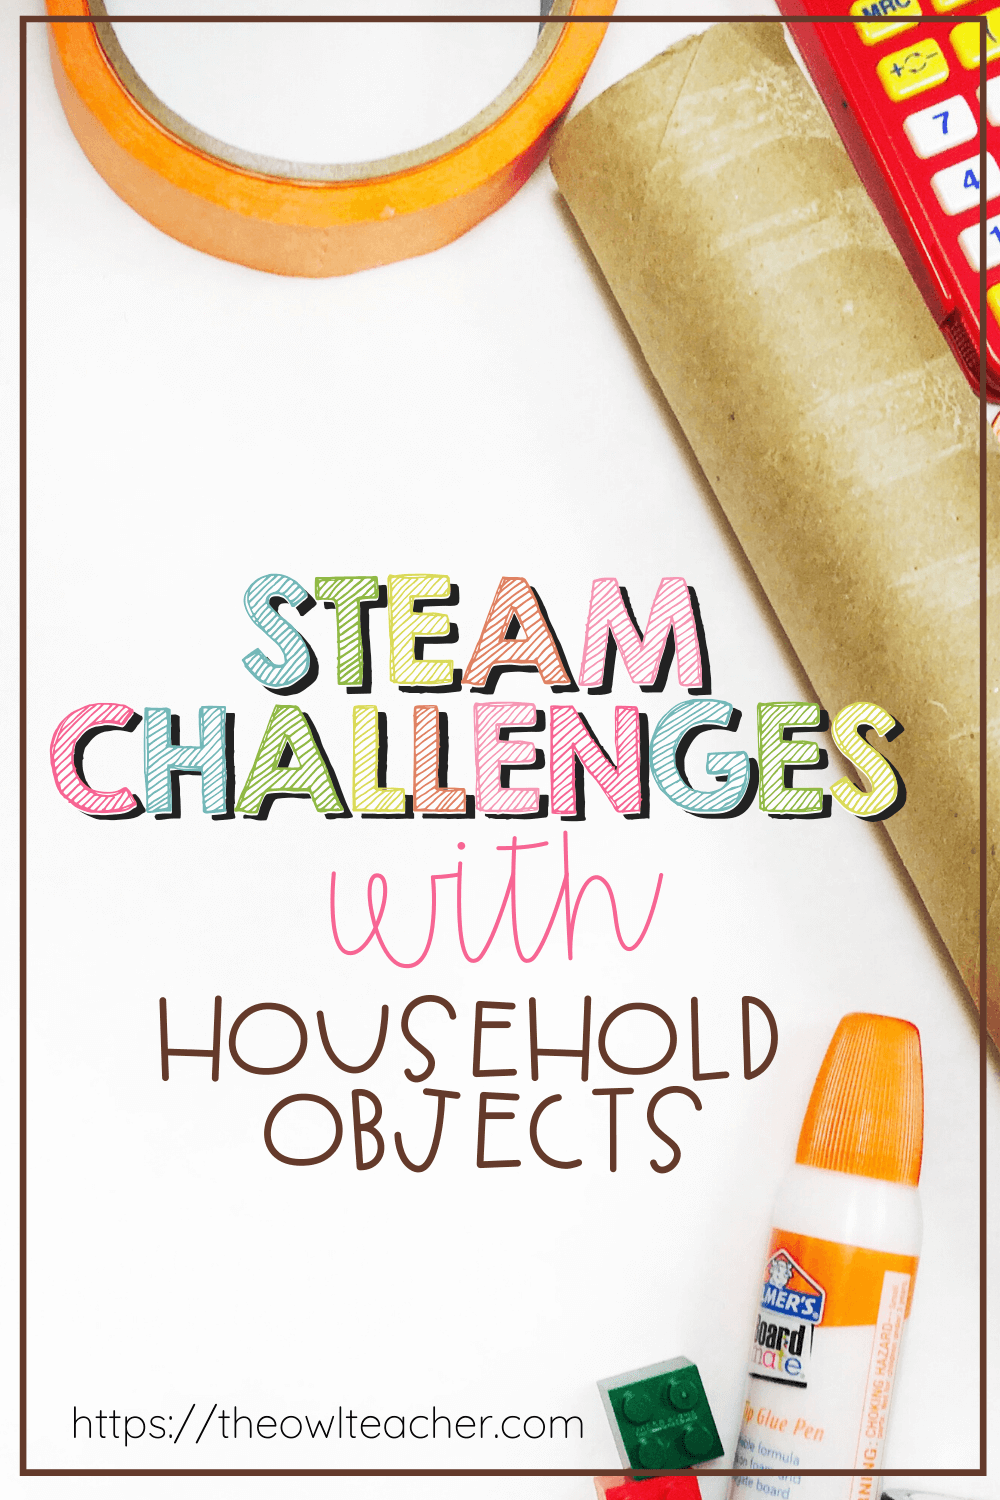 Are you looking for some STEAM/STEM activities without having to purchase a lot of materials? Check out these activities that use just regular household objects! via @deshawtammygmail.com